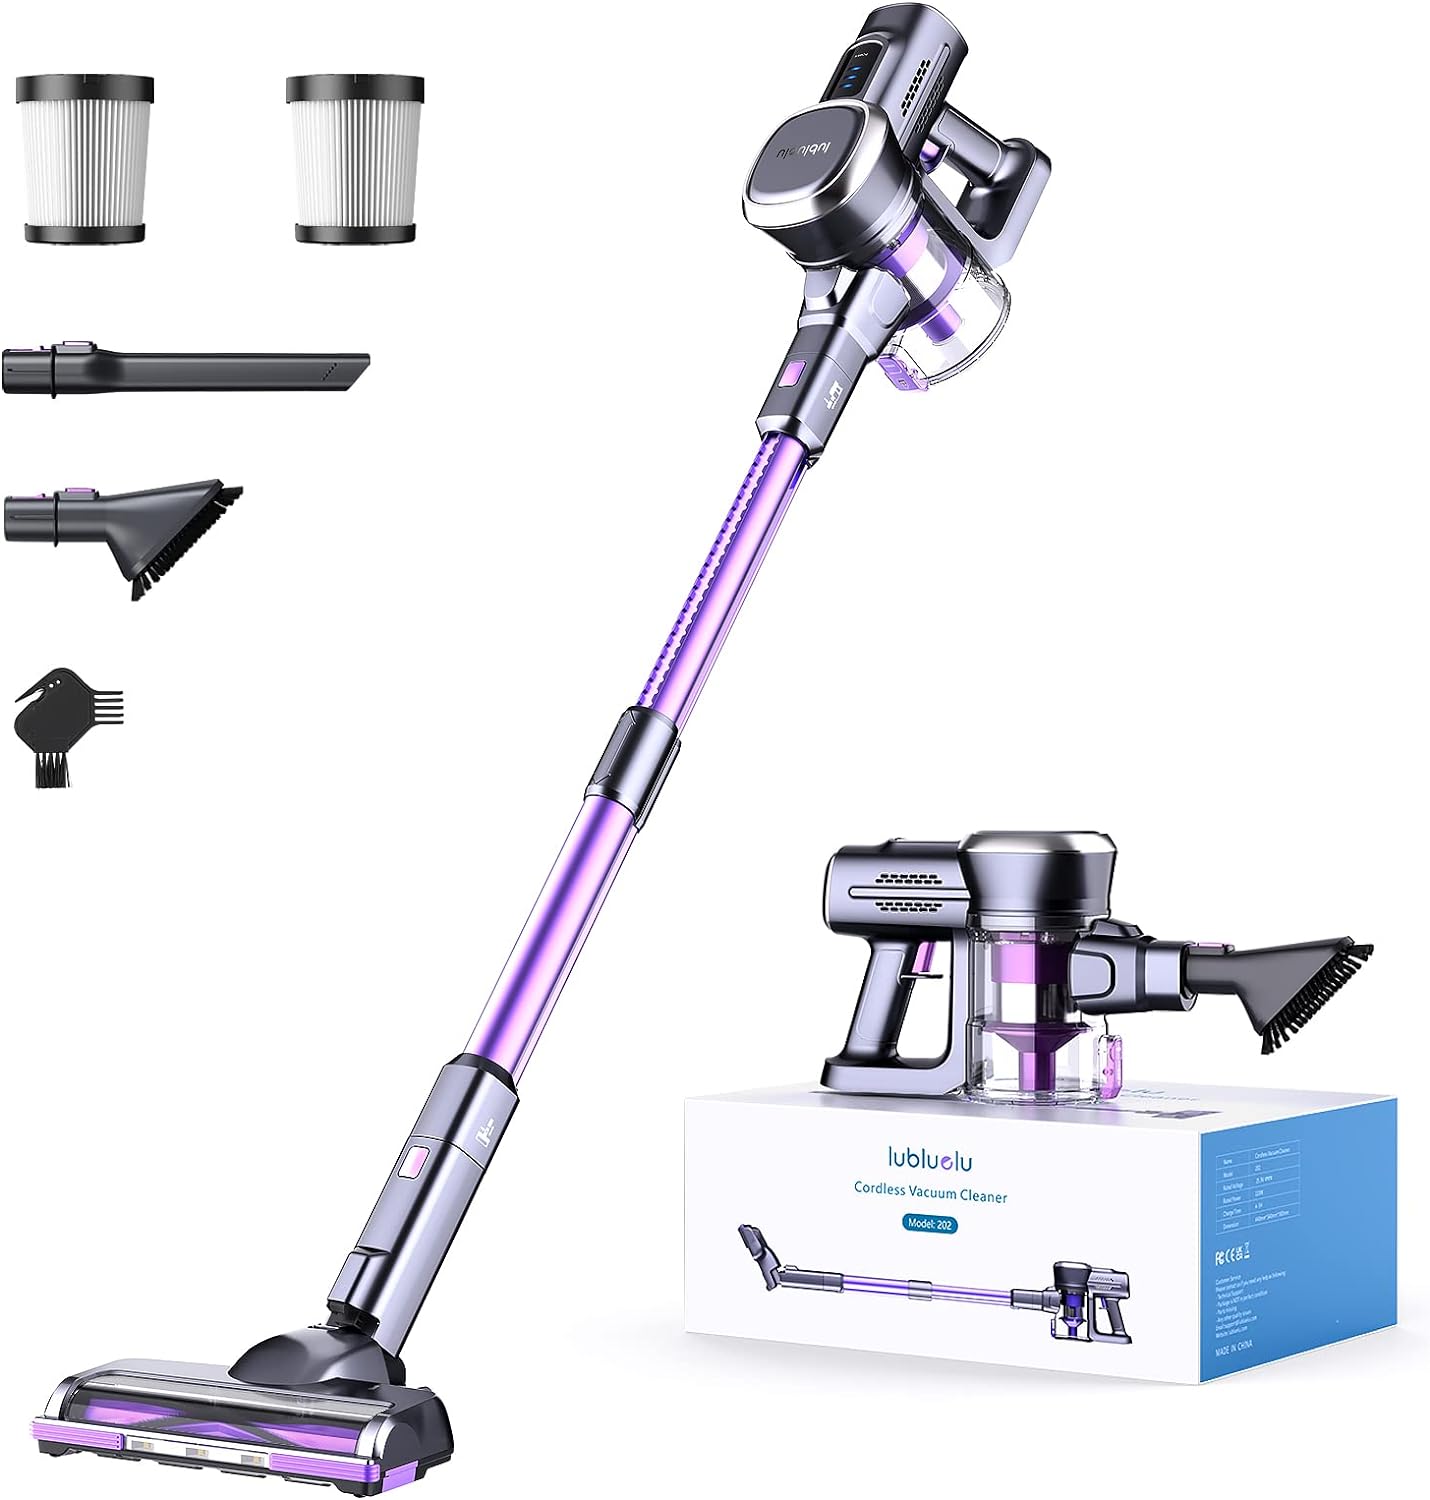 Lubluelu Cordless Vacuum Cleaner Review: Powerful and Versatile for Effortless Cleaning